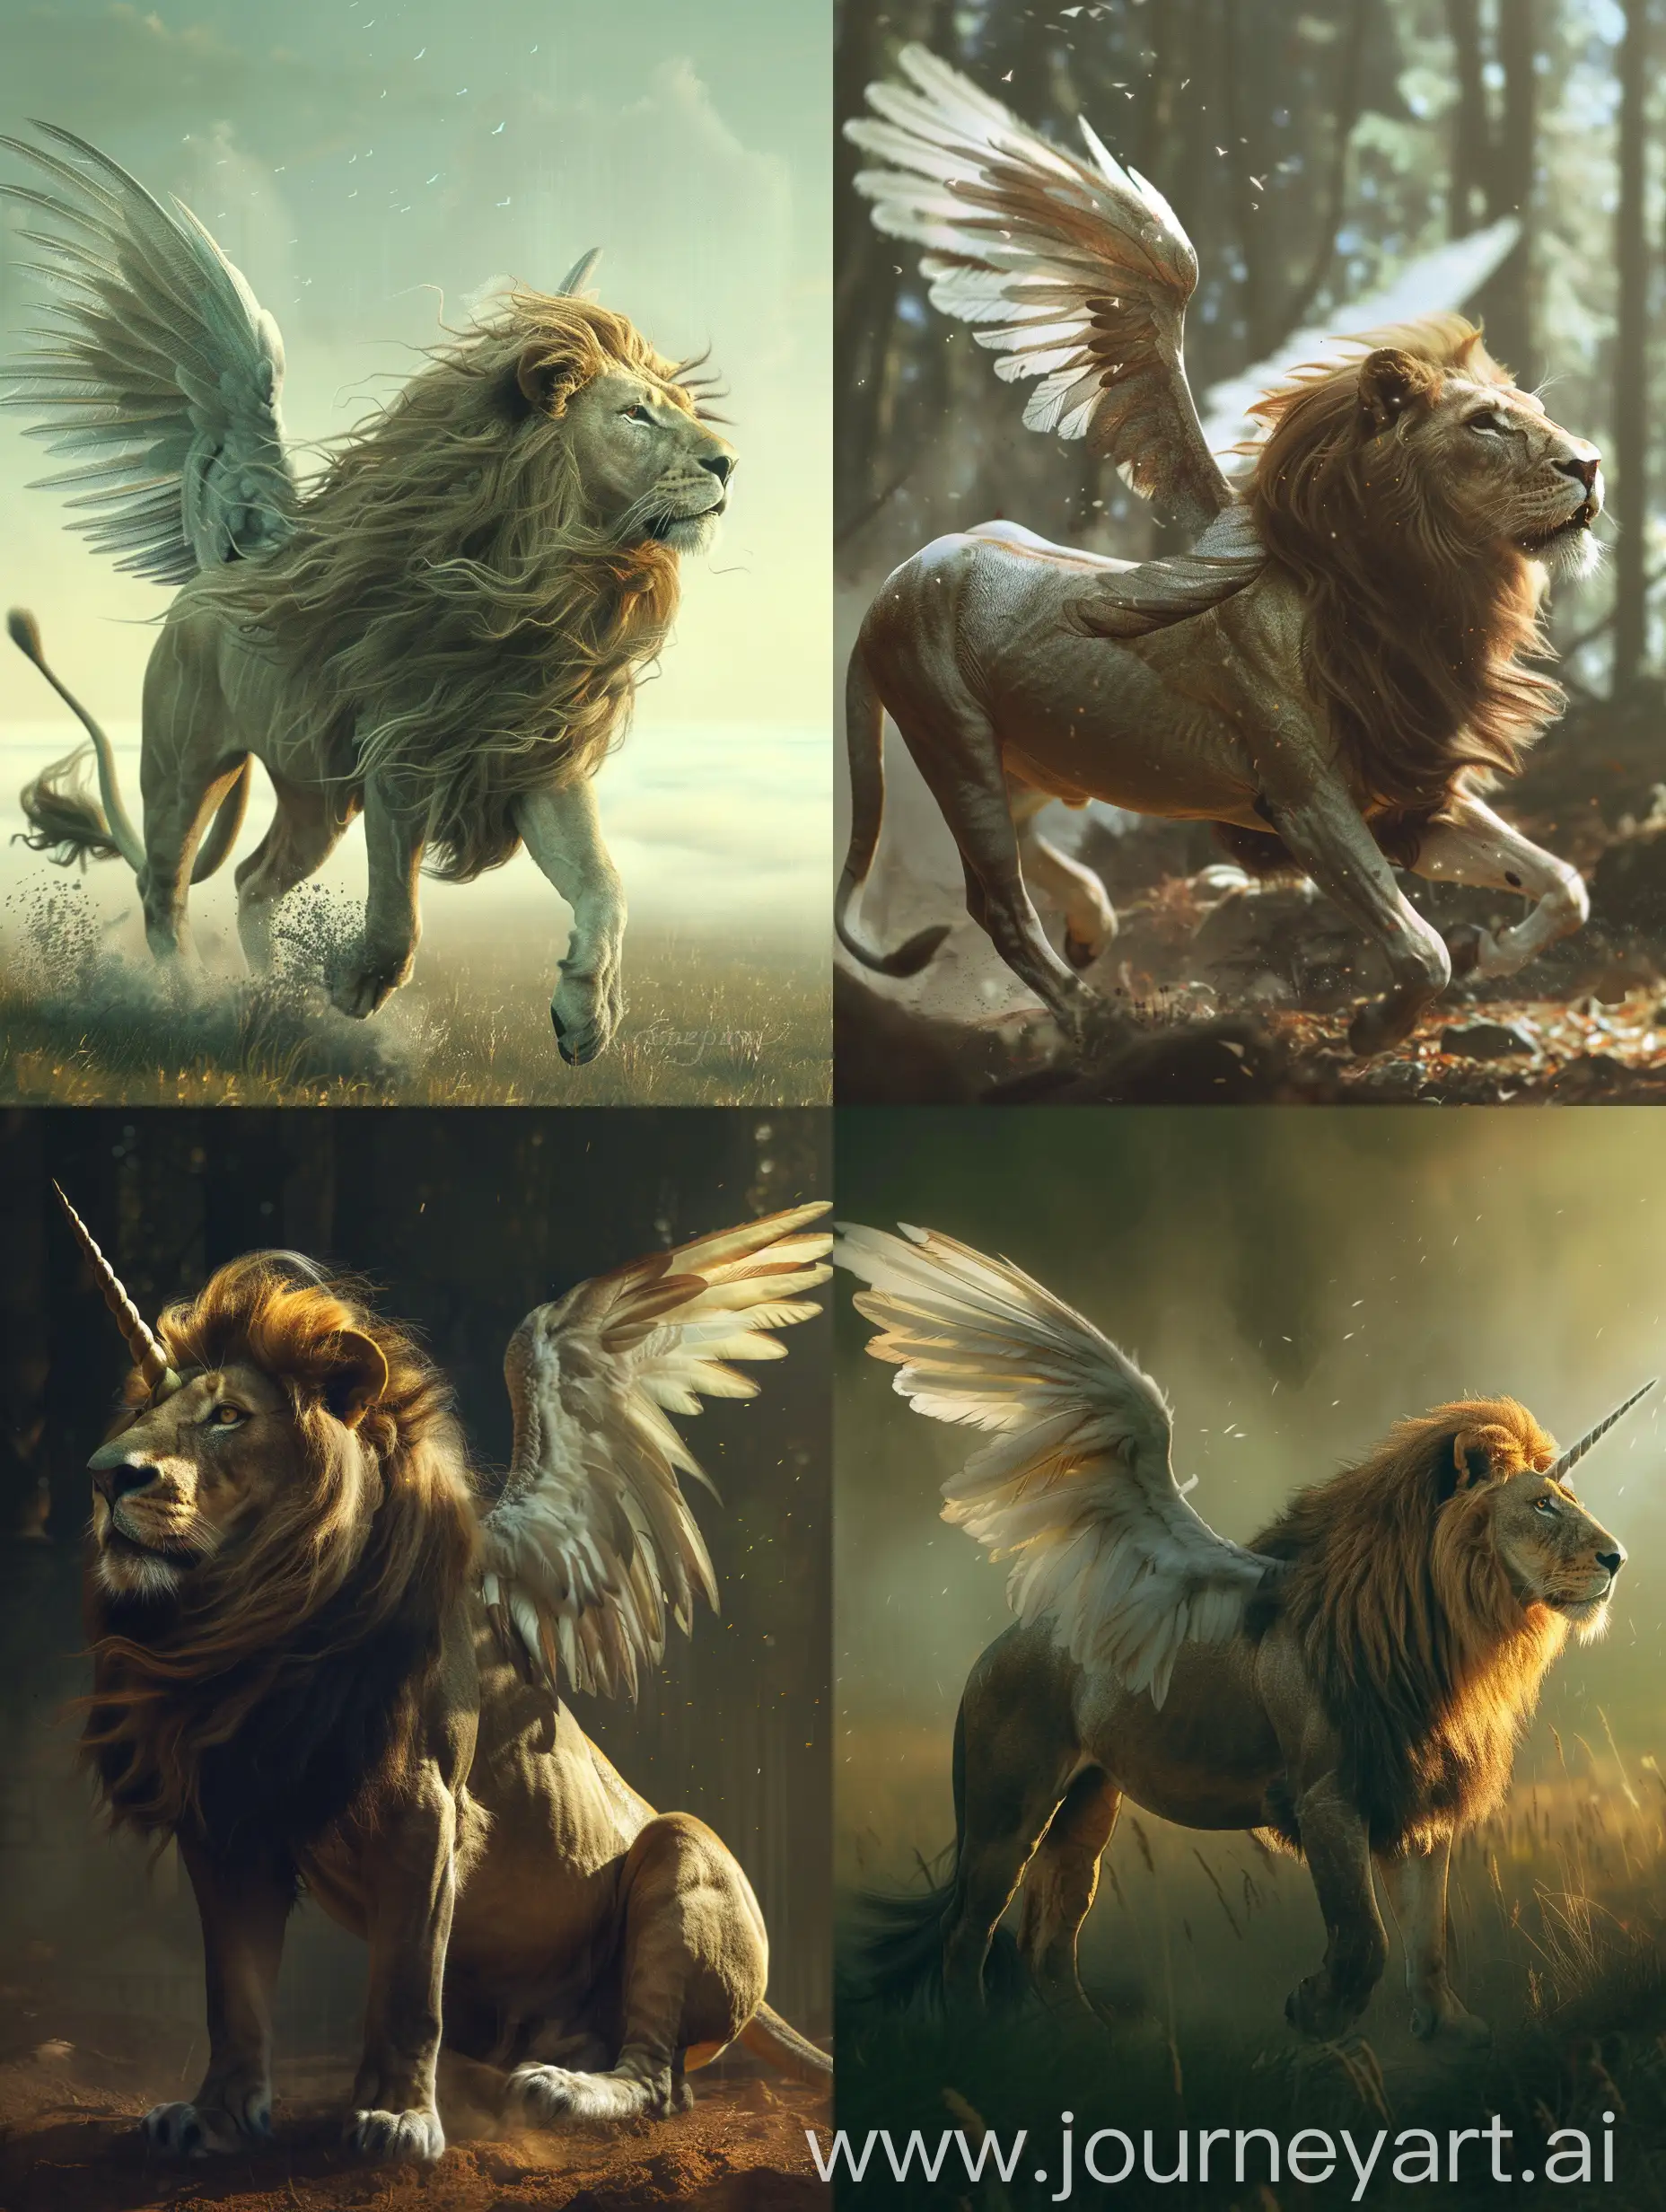 Make a hybrid animal of lion and winged horse, cinematic